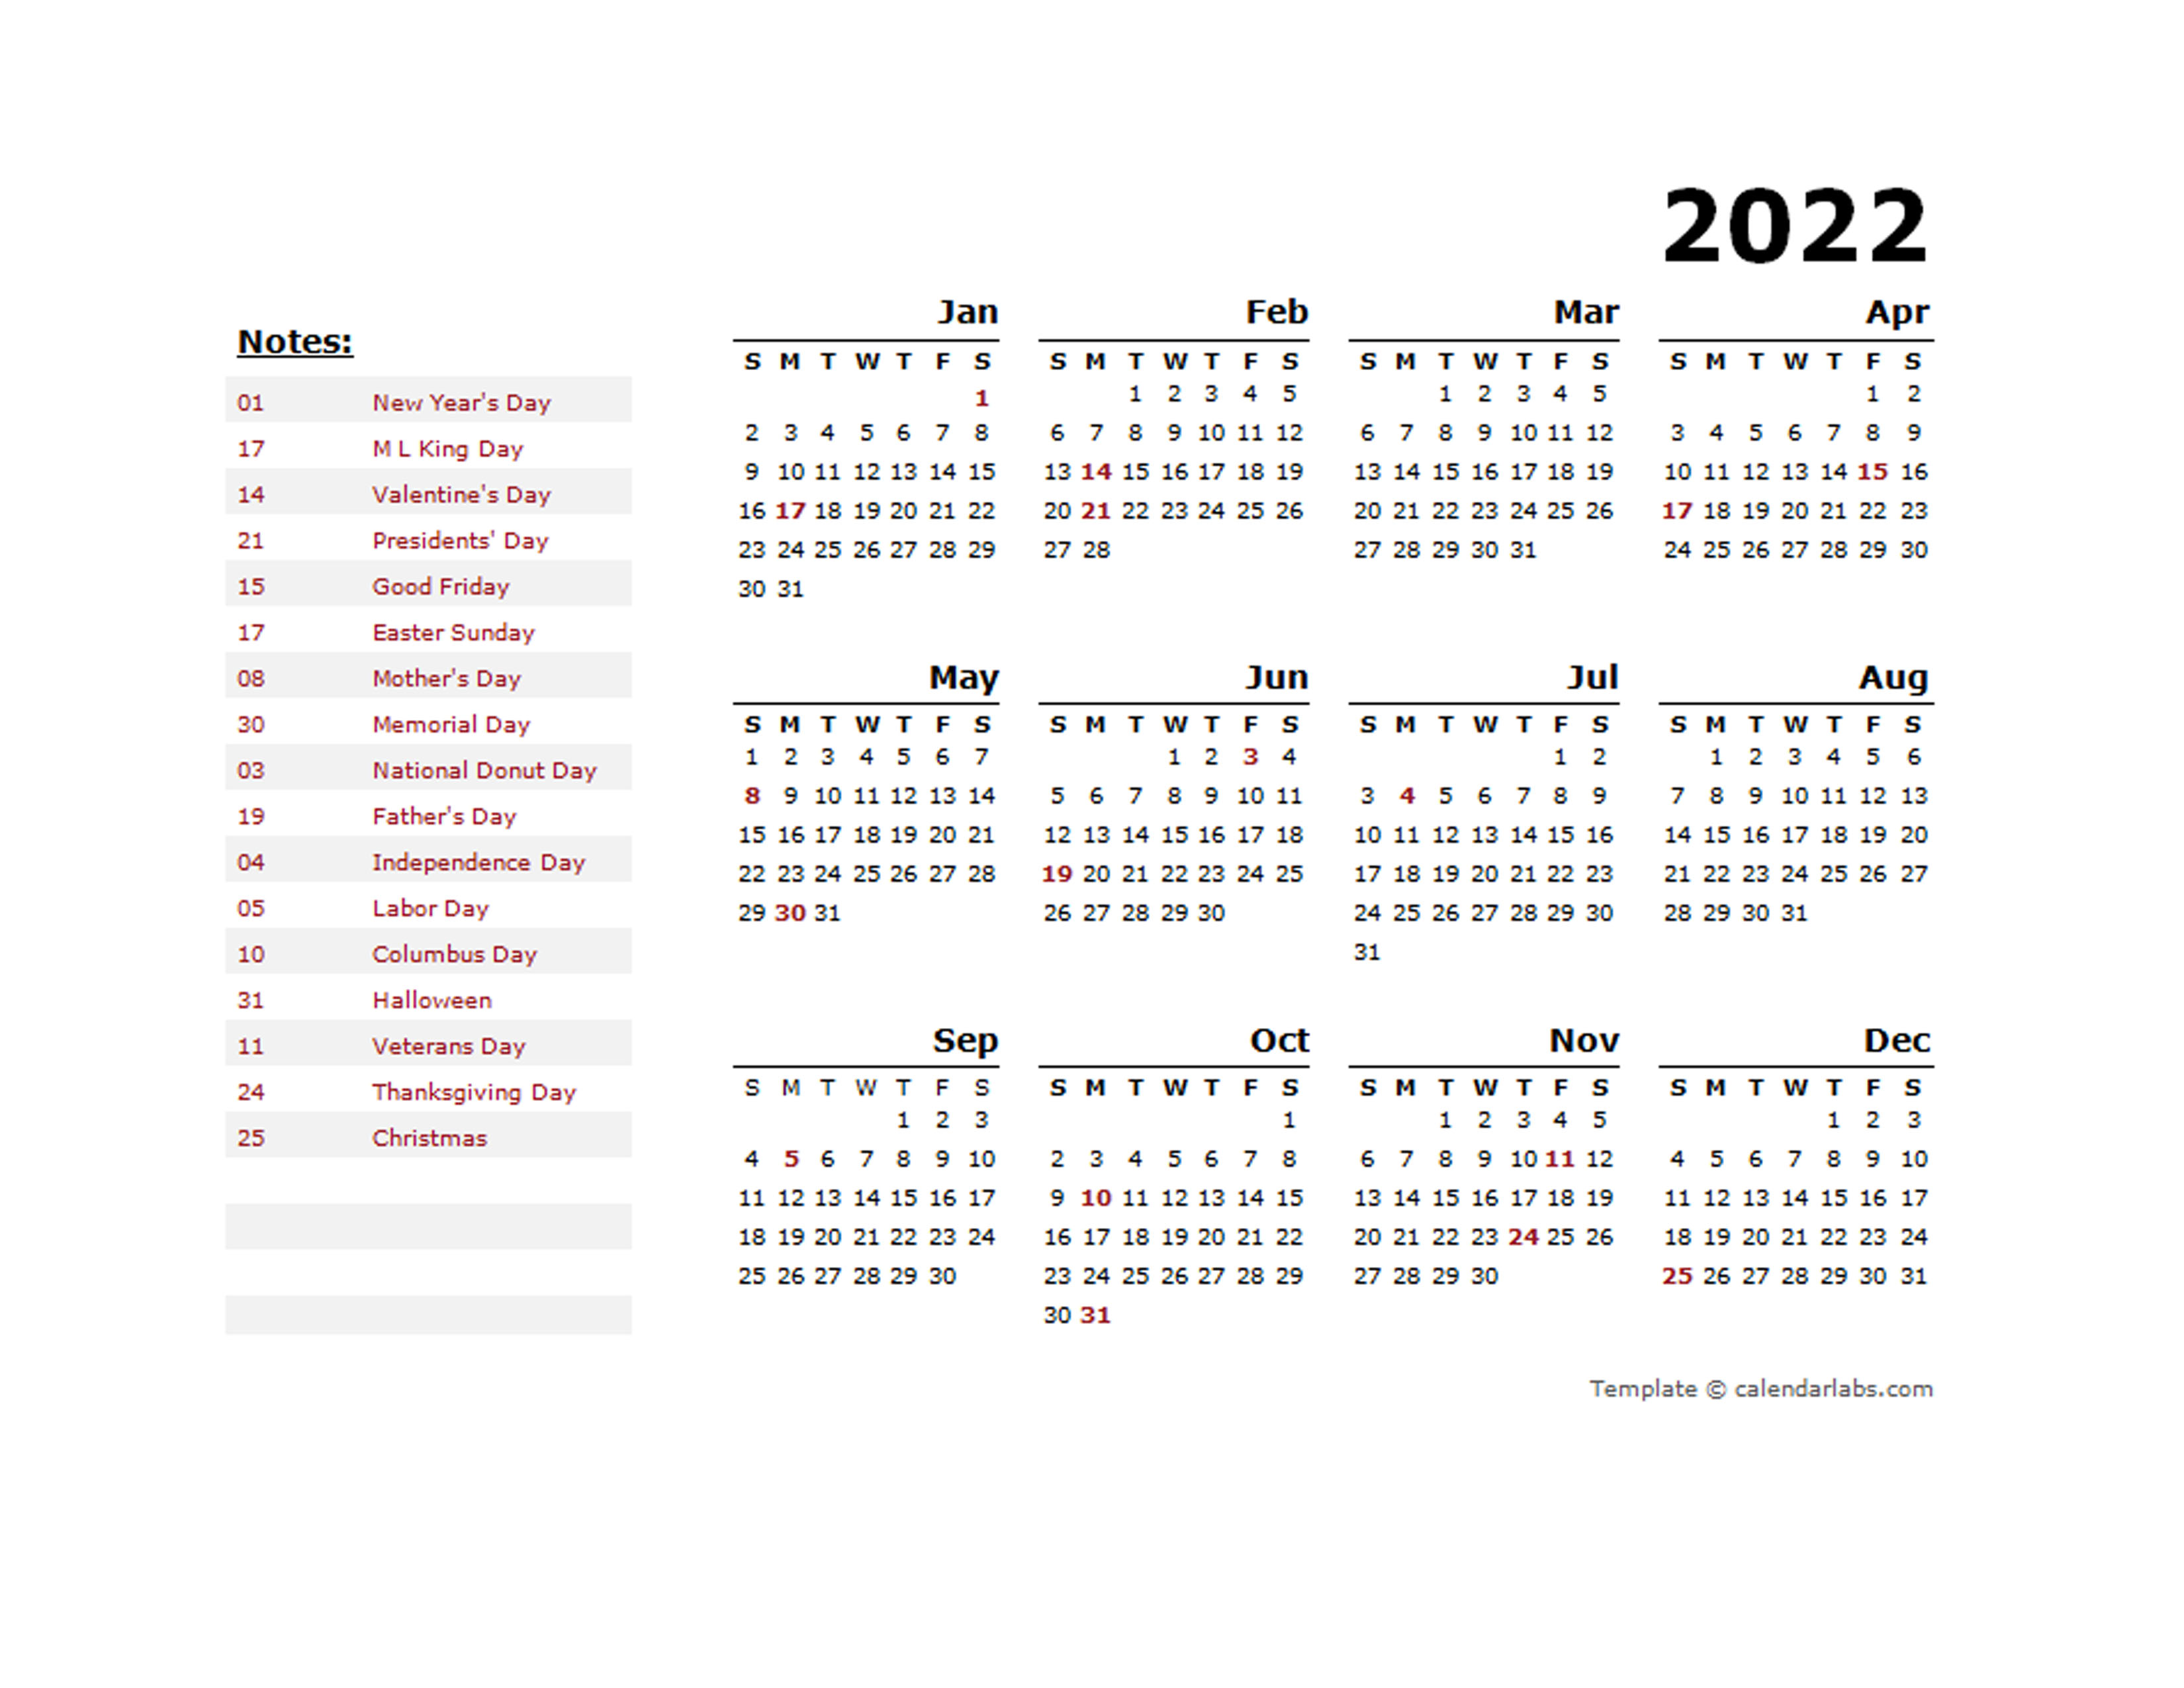 2022 Year Calendar Template with US Holidays - Free ...